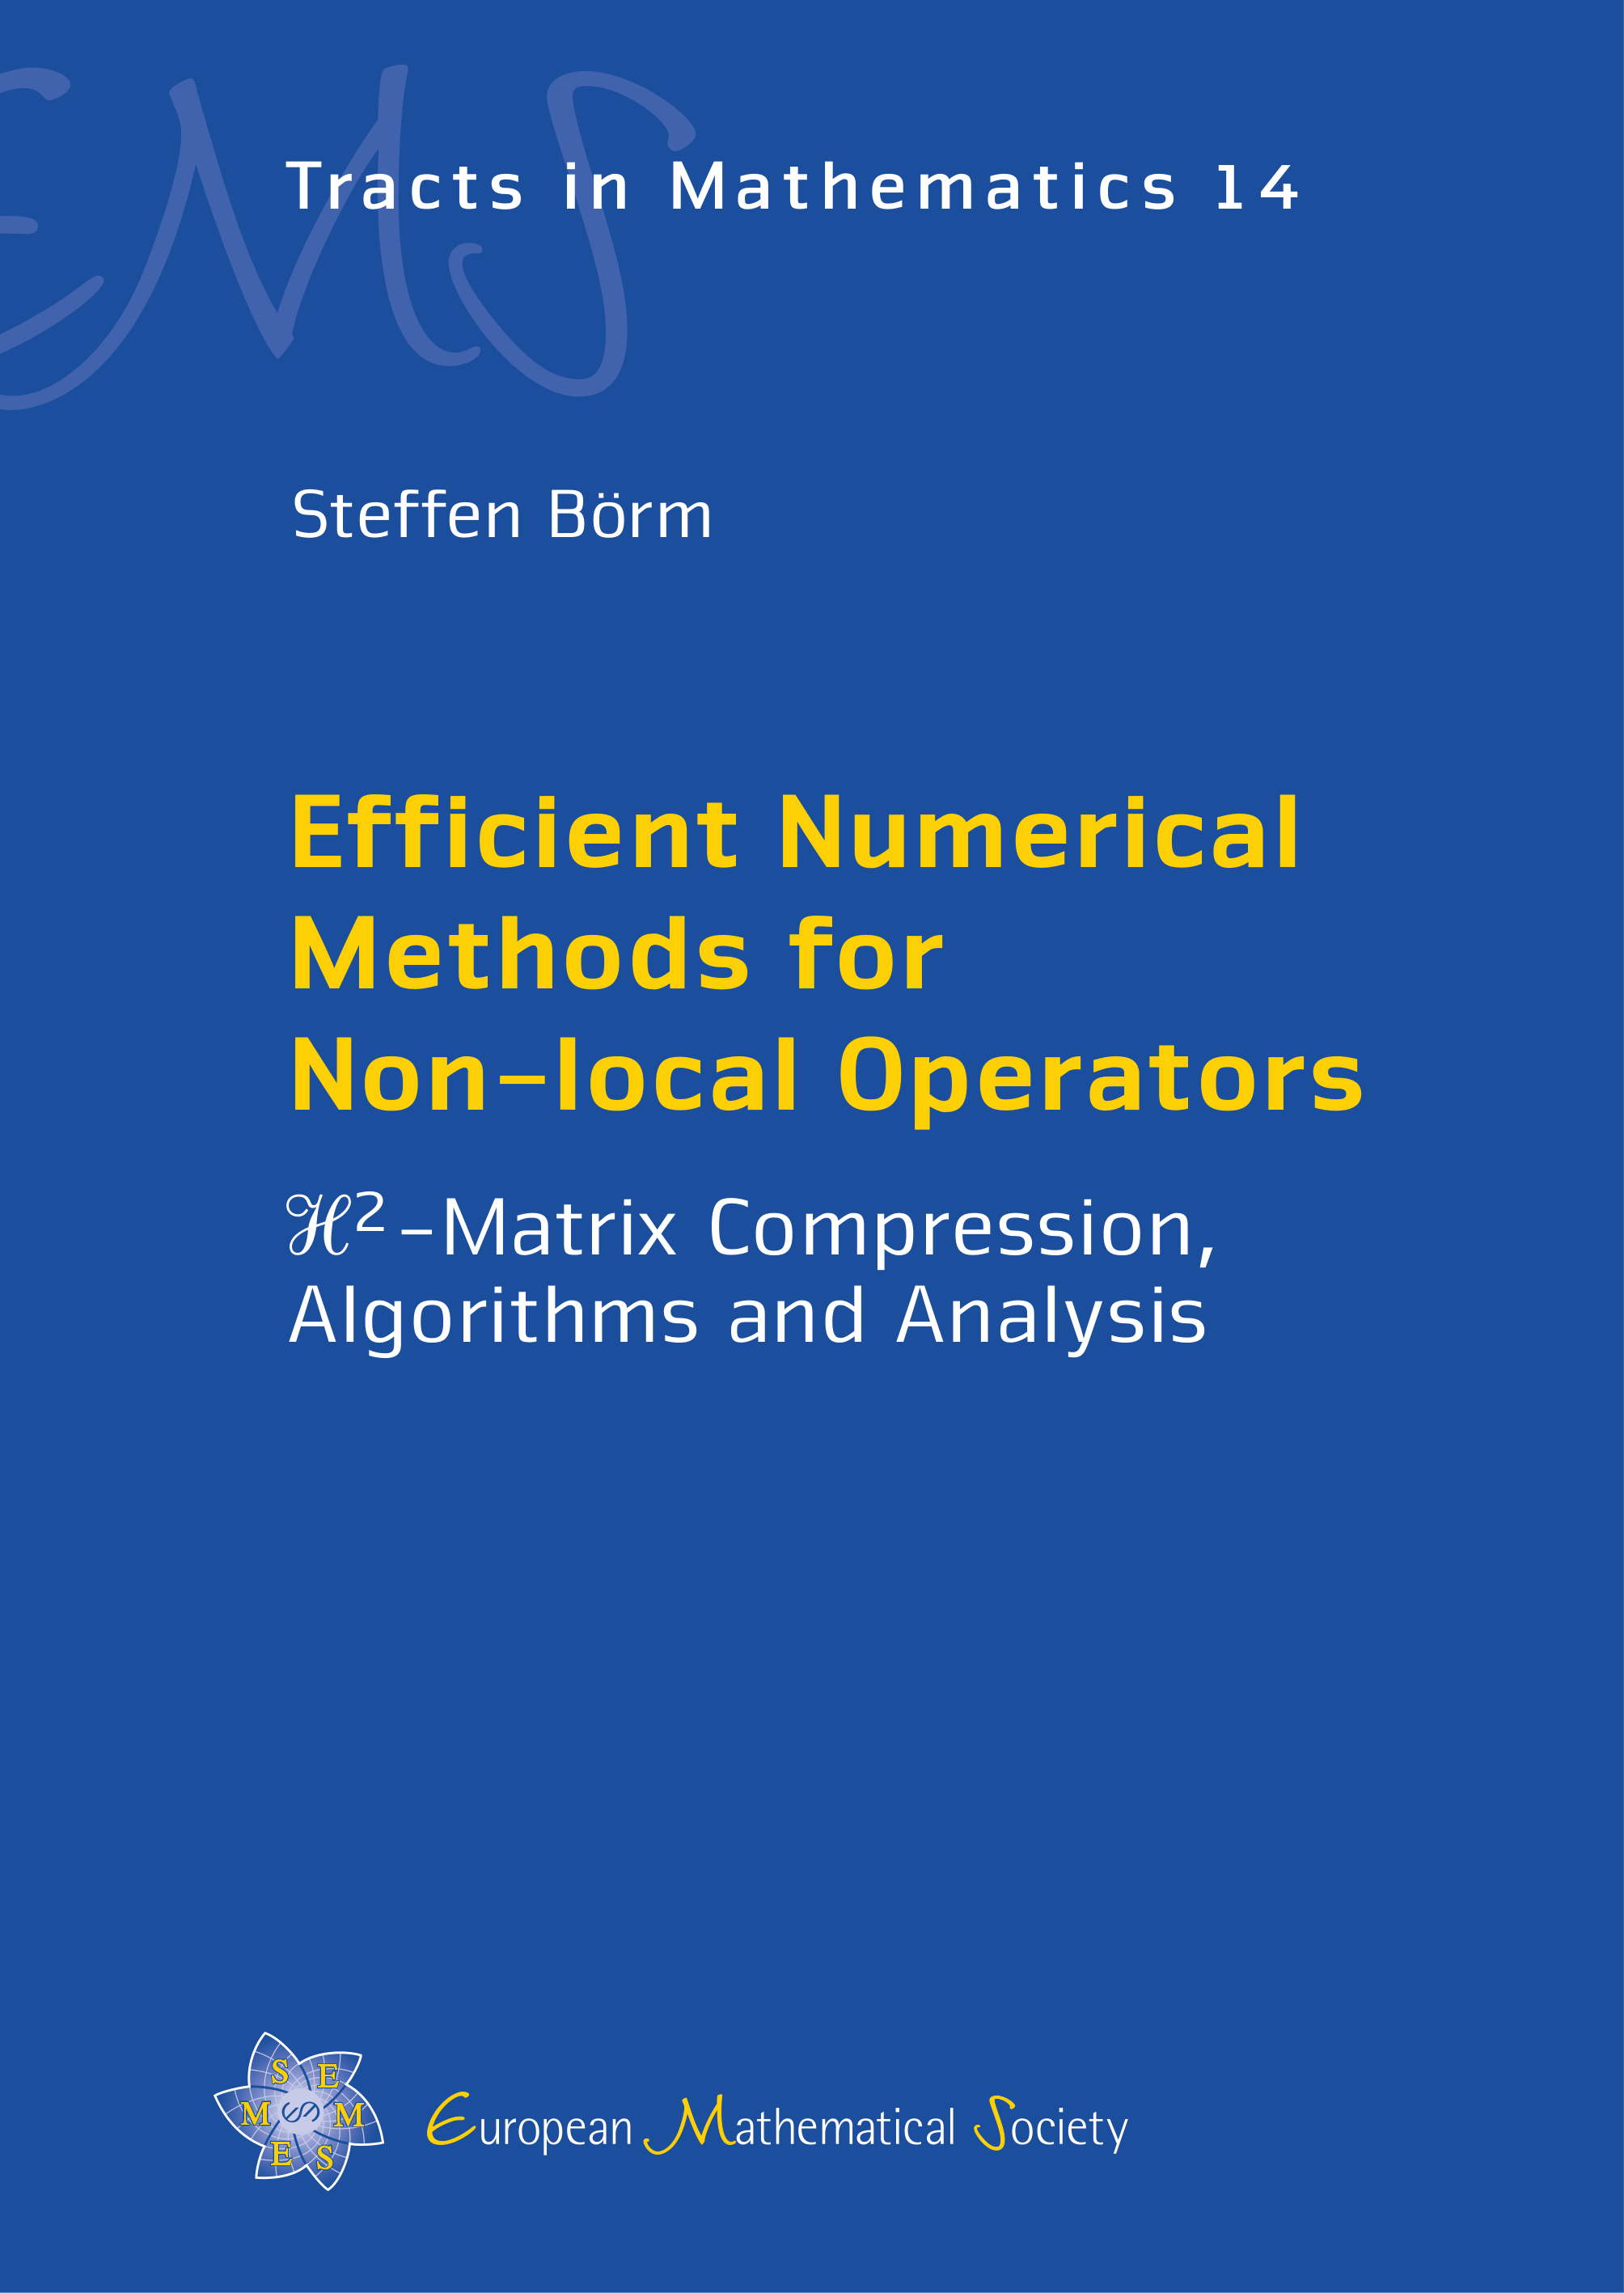 Hierarchical matrices cover